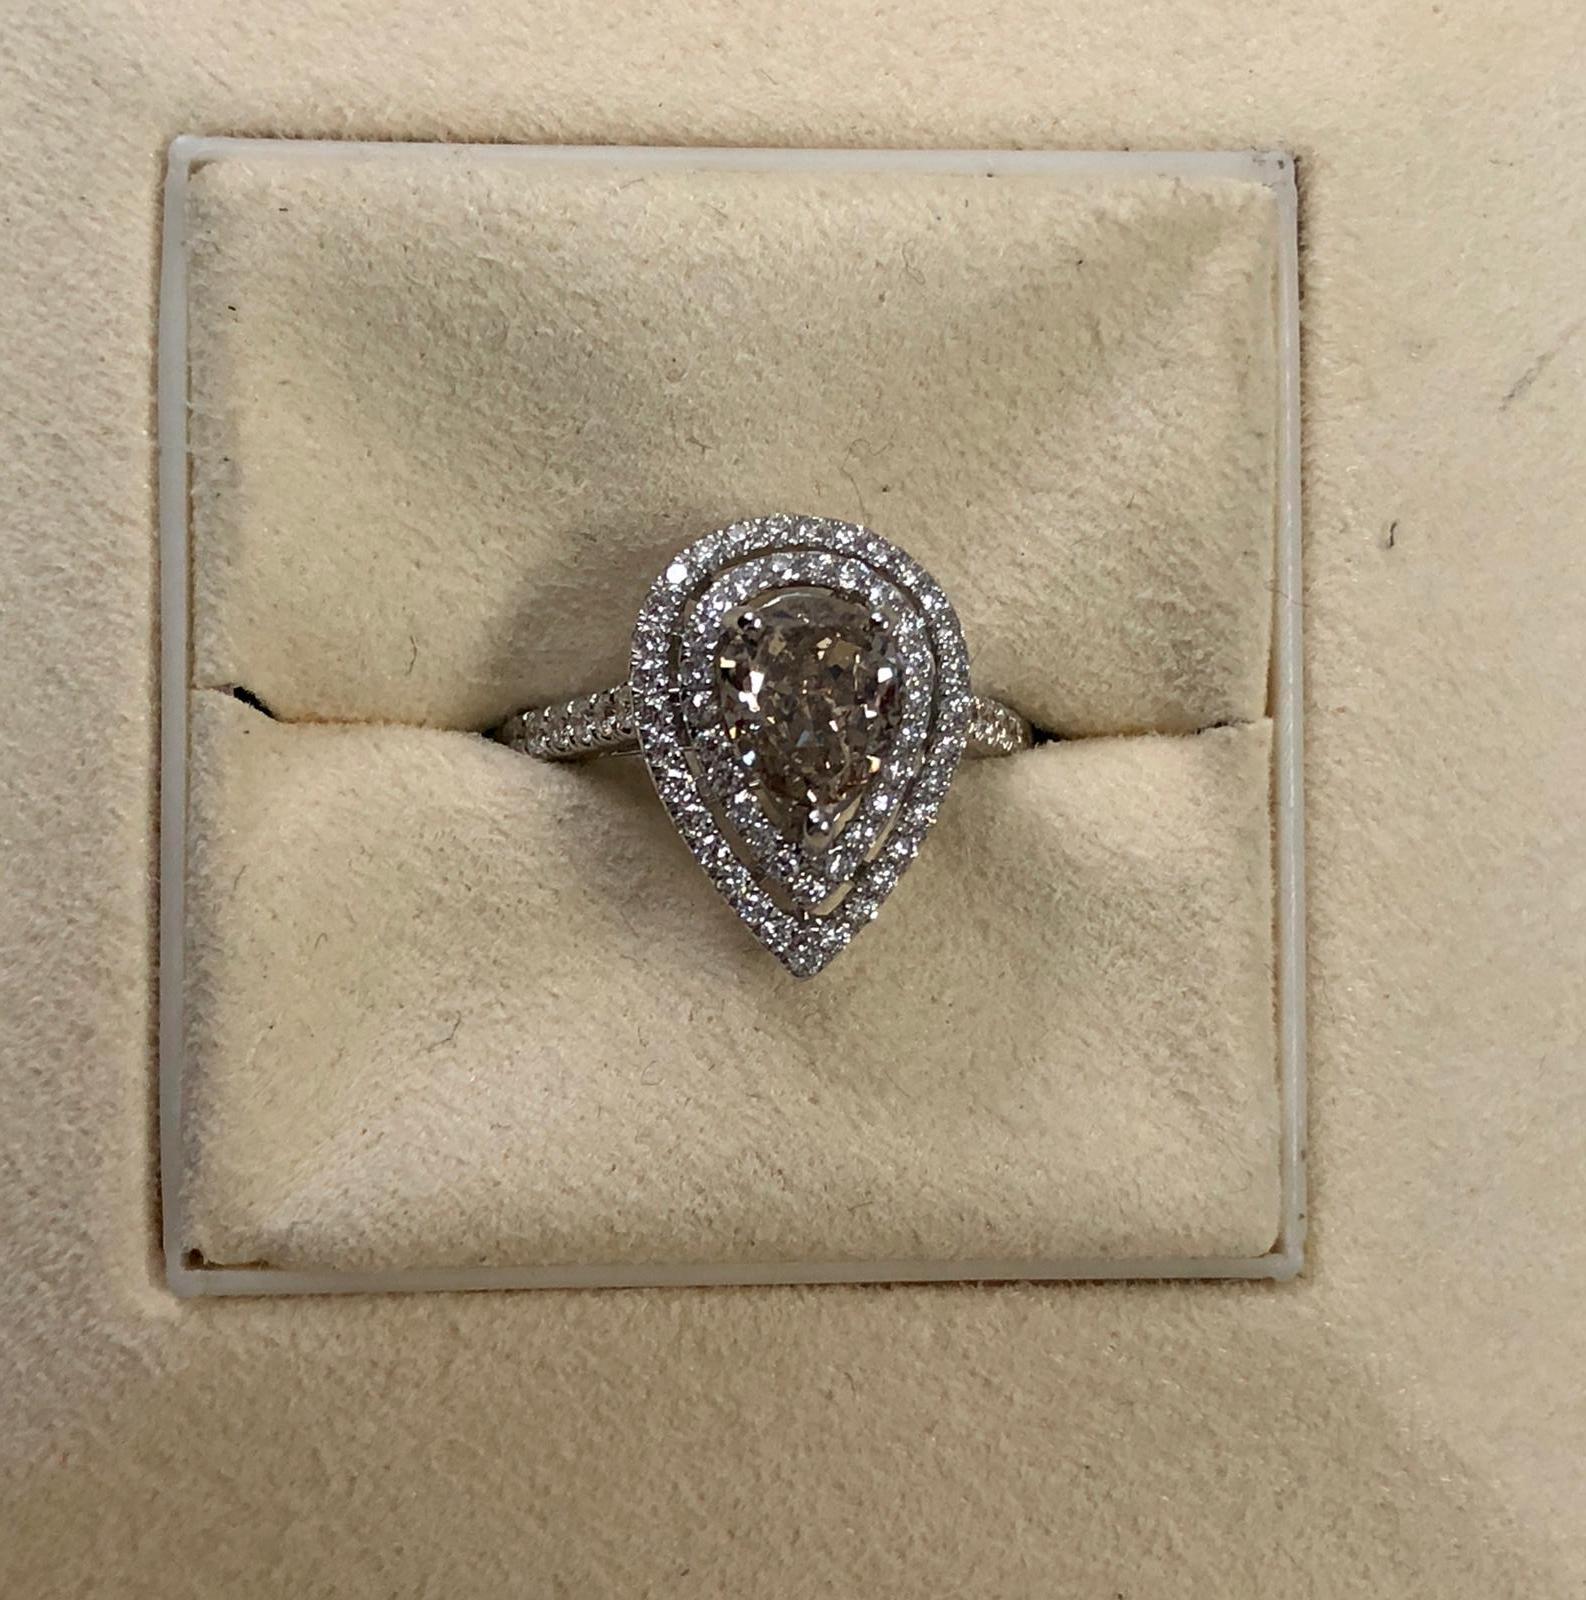 Fancy Light Yellowish Brown natural pear shape diamond weighing 1.28 carats by GIA.  Half way paved white diamonds in the double row halo setting. Its transparency and luster are excellent. set on 18K white gold, this ring is the ultimate gift for